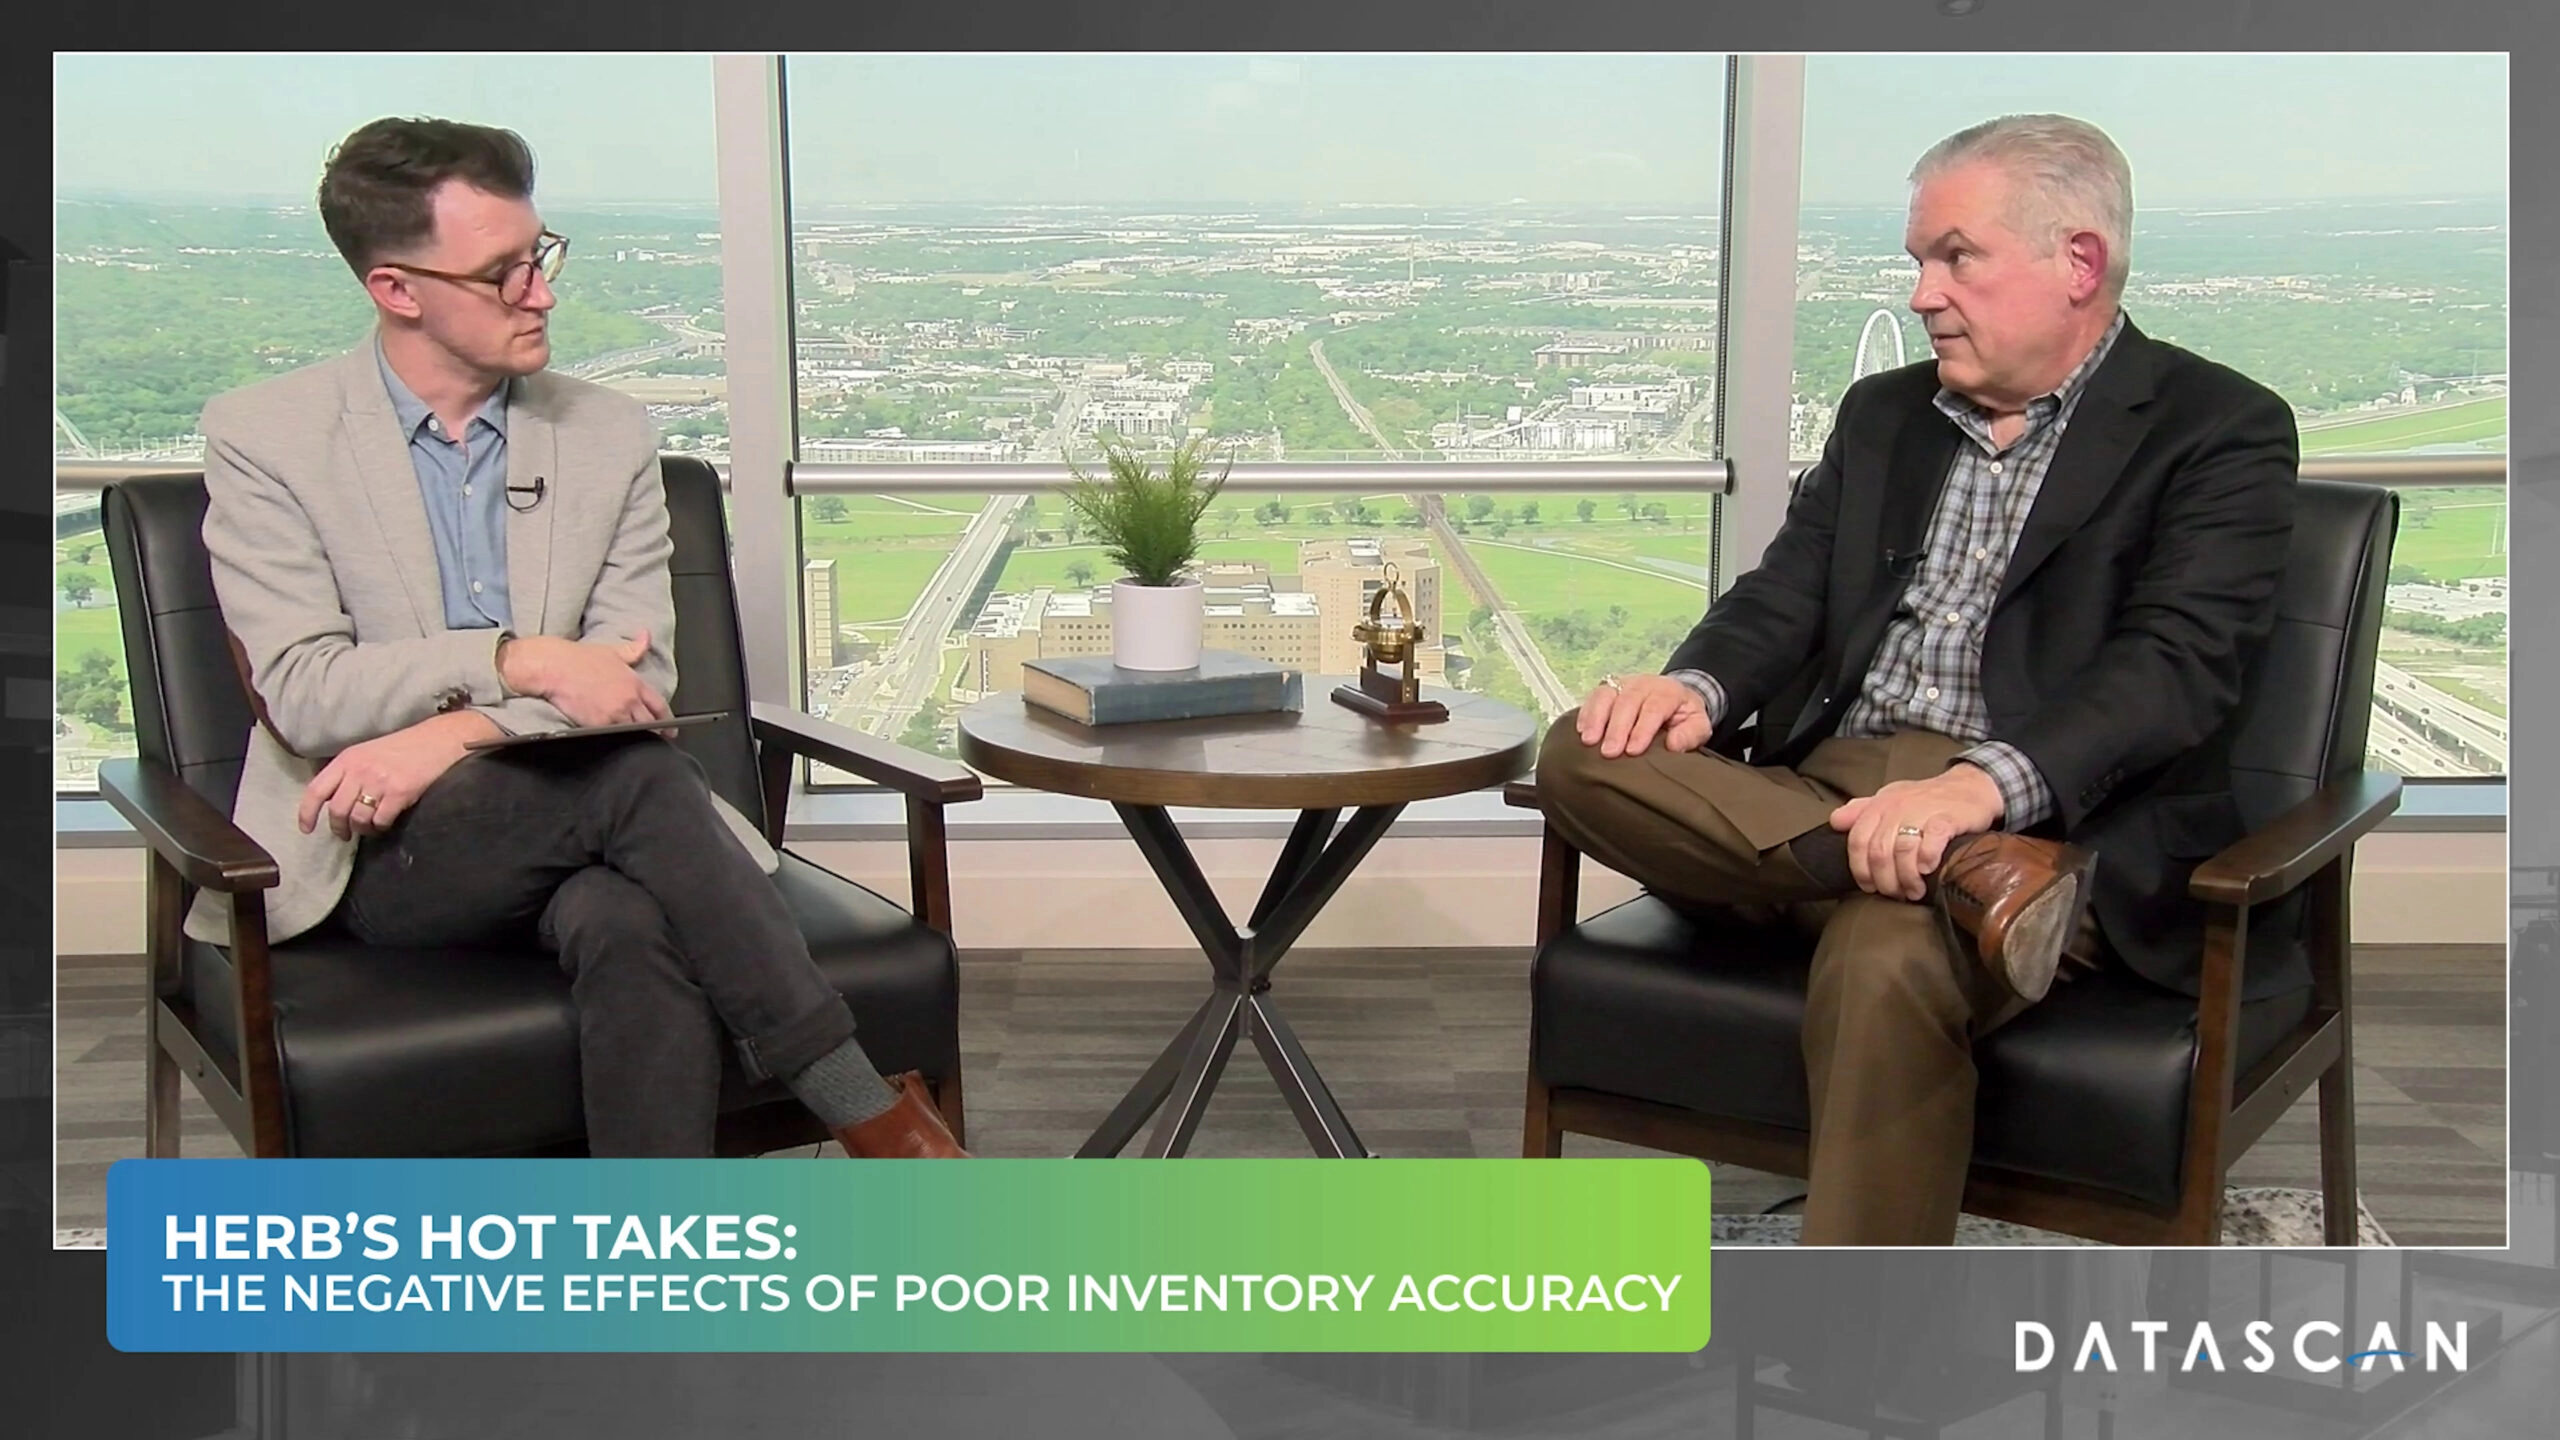 The Negative Impacts of Poor Inventory Accuracy